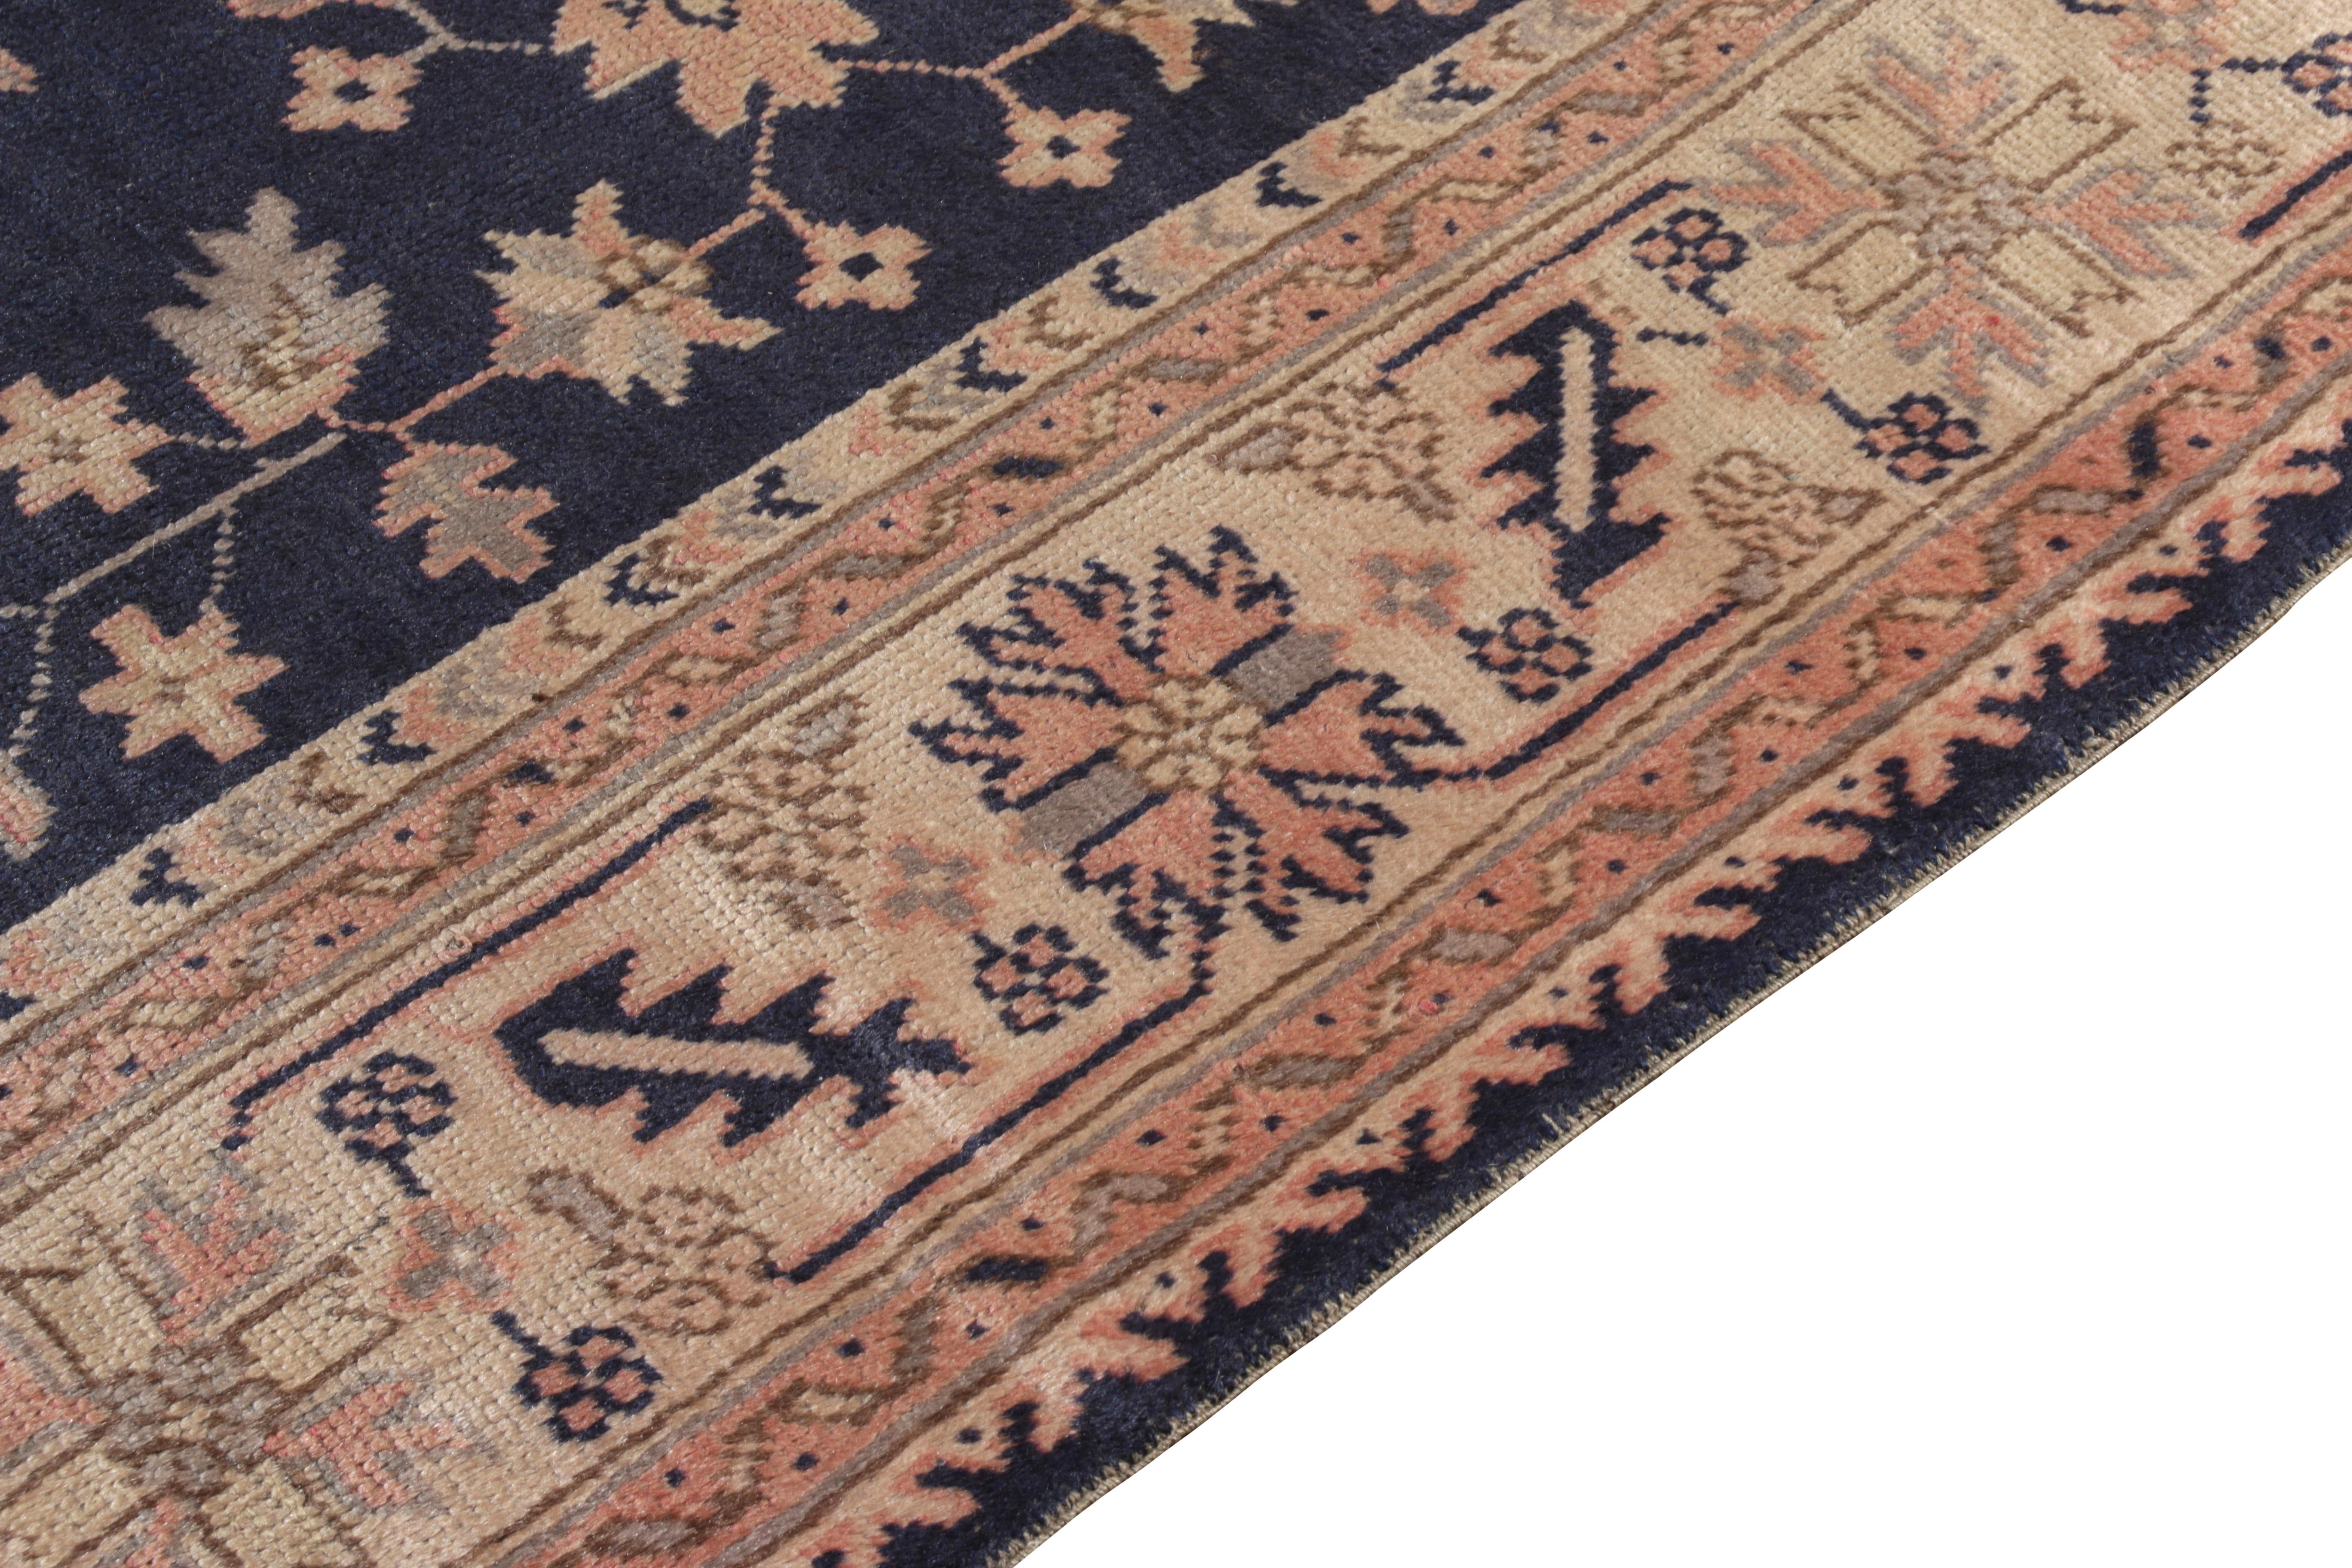 Antique Turkish Oushak Rug in Blue, Pink Medallion Floral Pattern by Rug & Kilim In Good Condition For Sale In Long Island City, NY